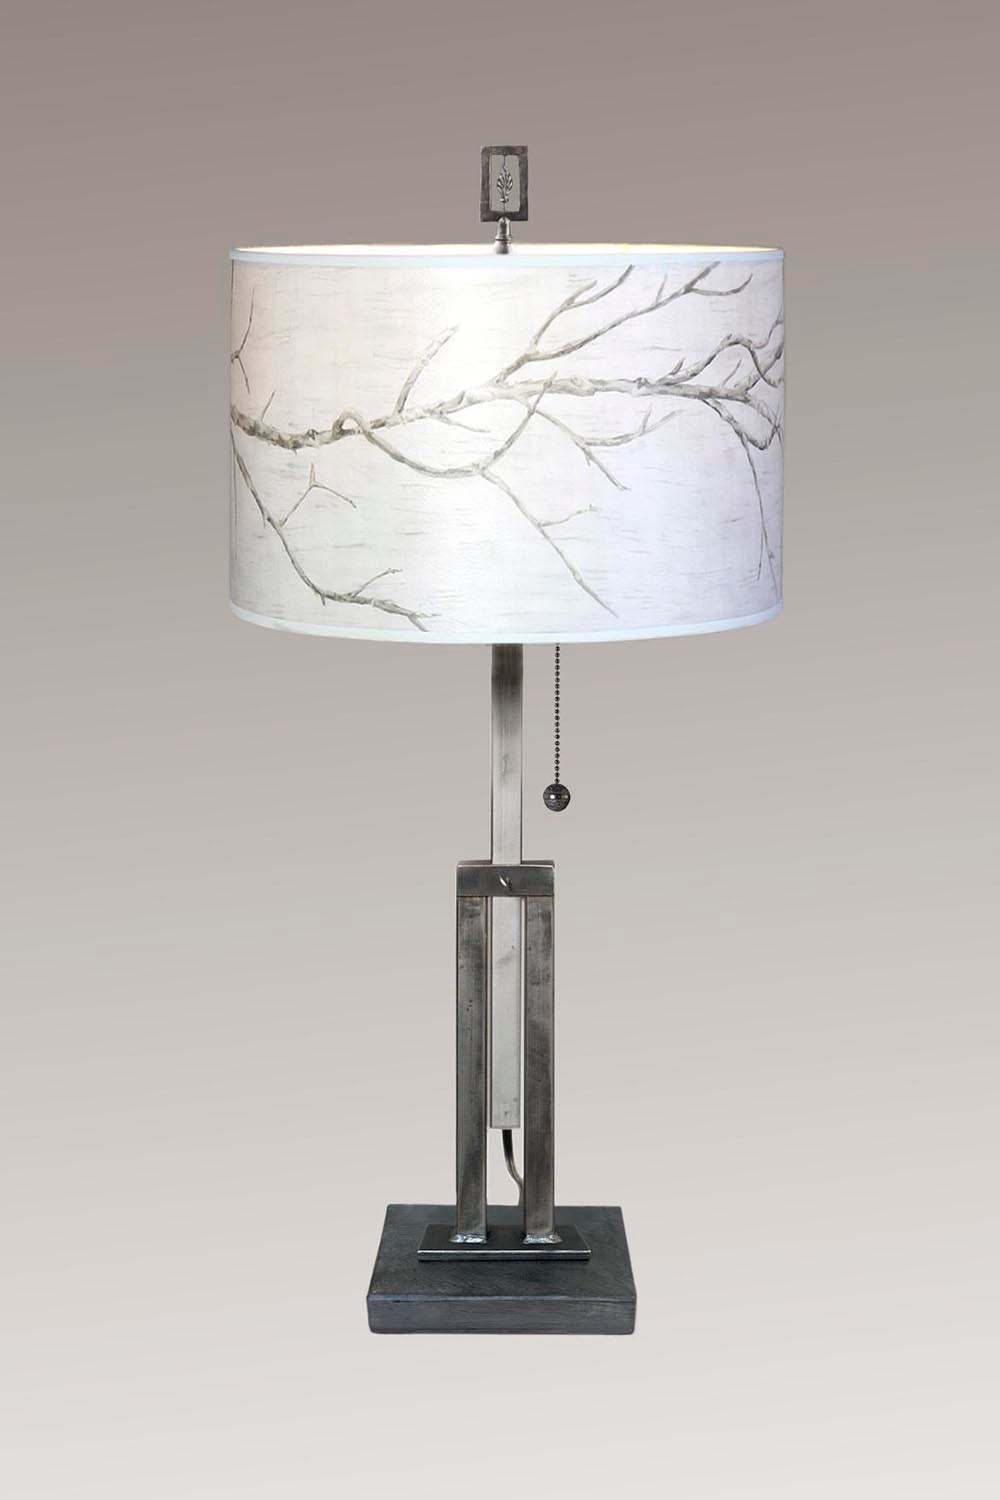 Janna Ugone &amp; Co Table Lamps Adjustable-Height Steel Table Lamp with Large Drum Shade in Sweeping Branch